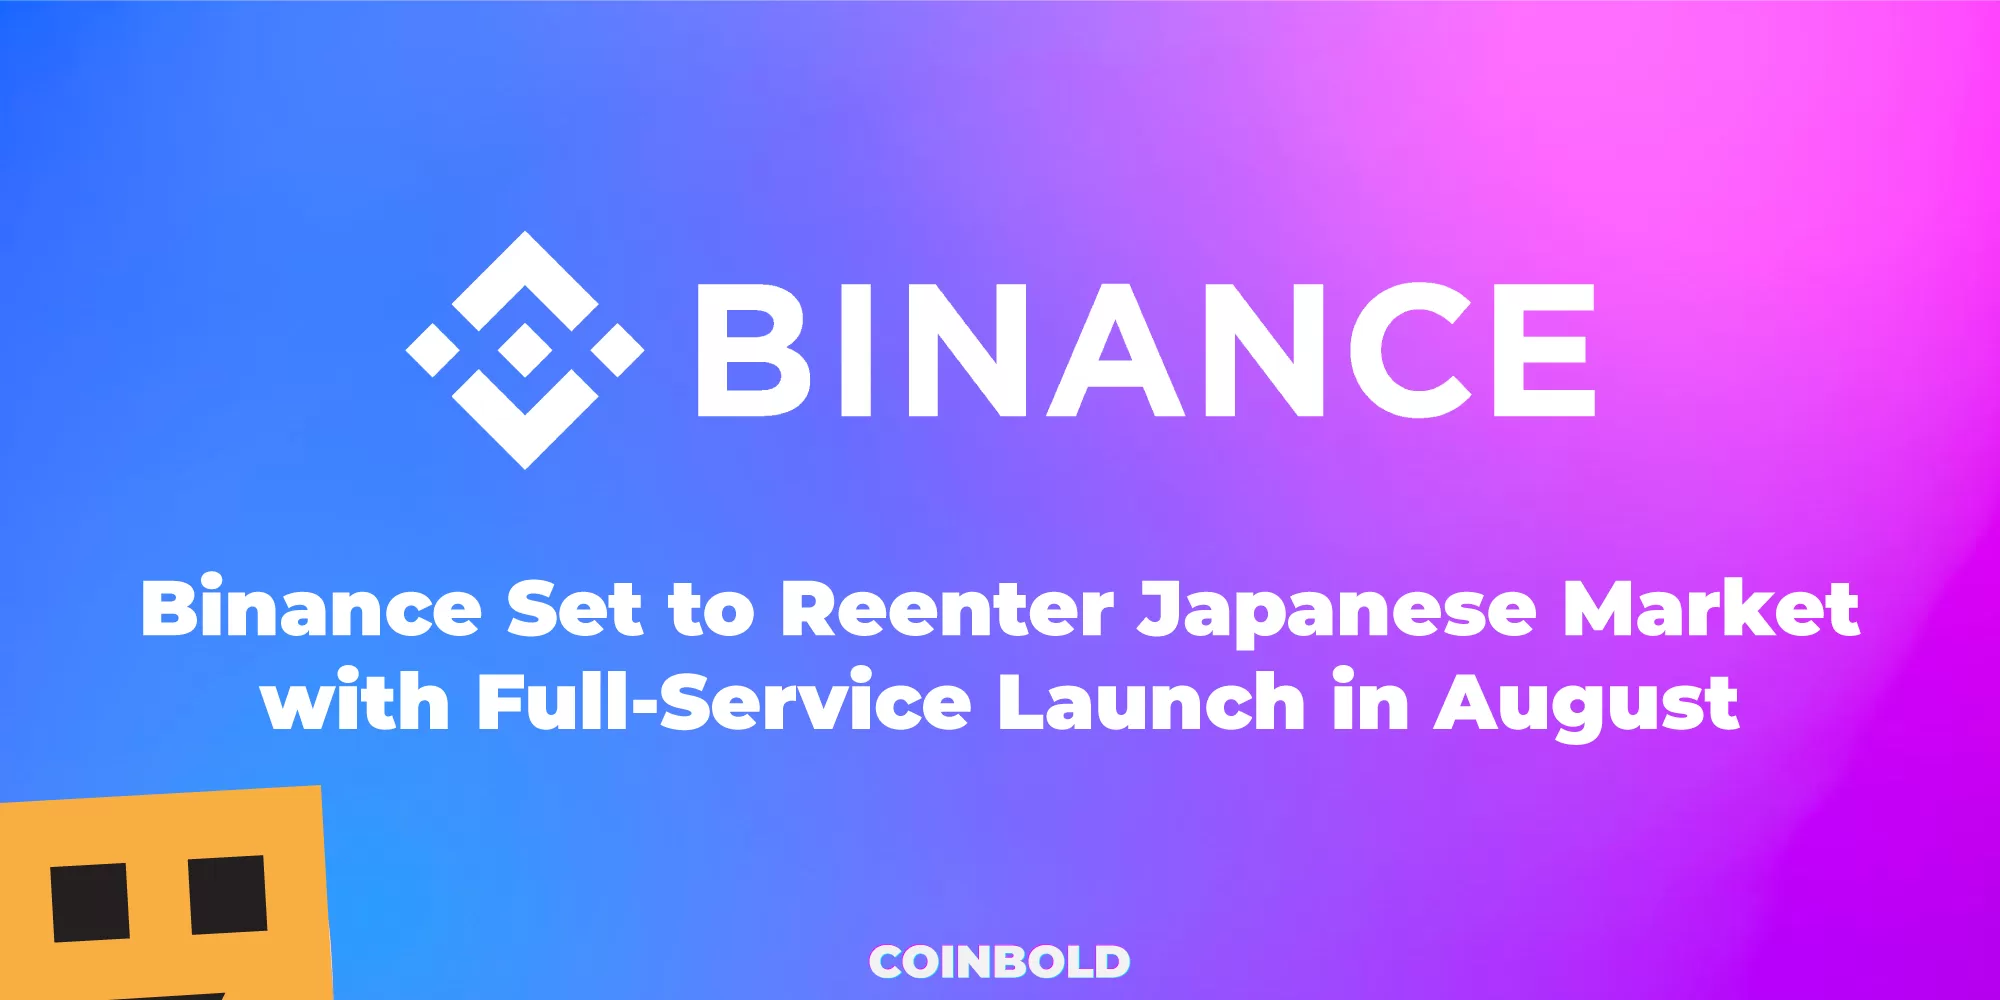 Binance Set to Reenter Japanese Market with Full-Service Launch in August